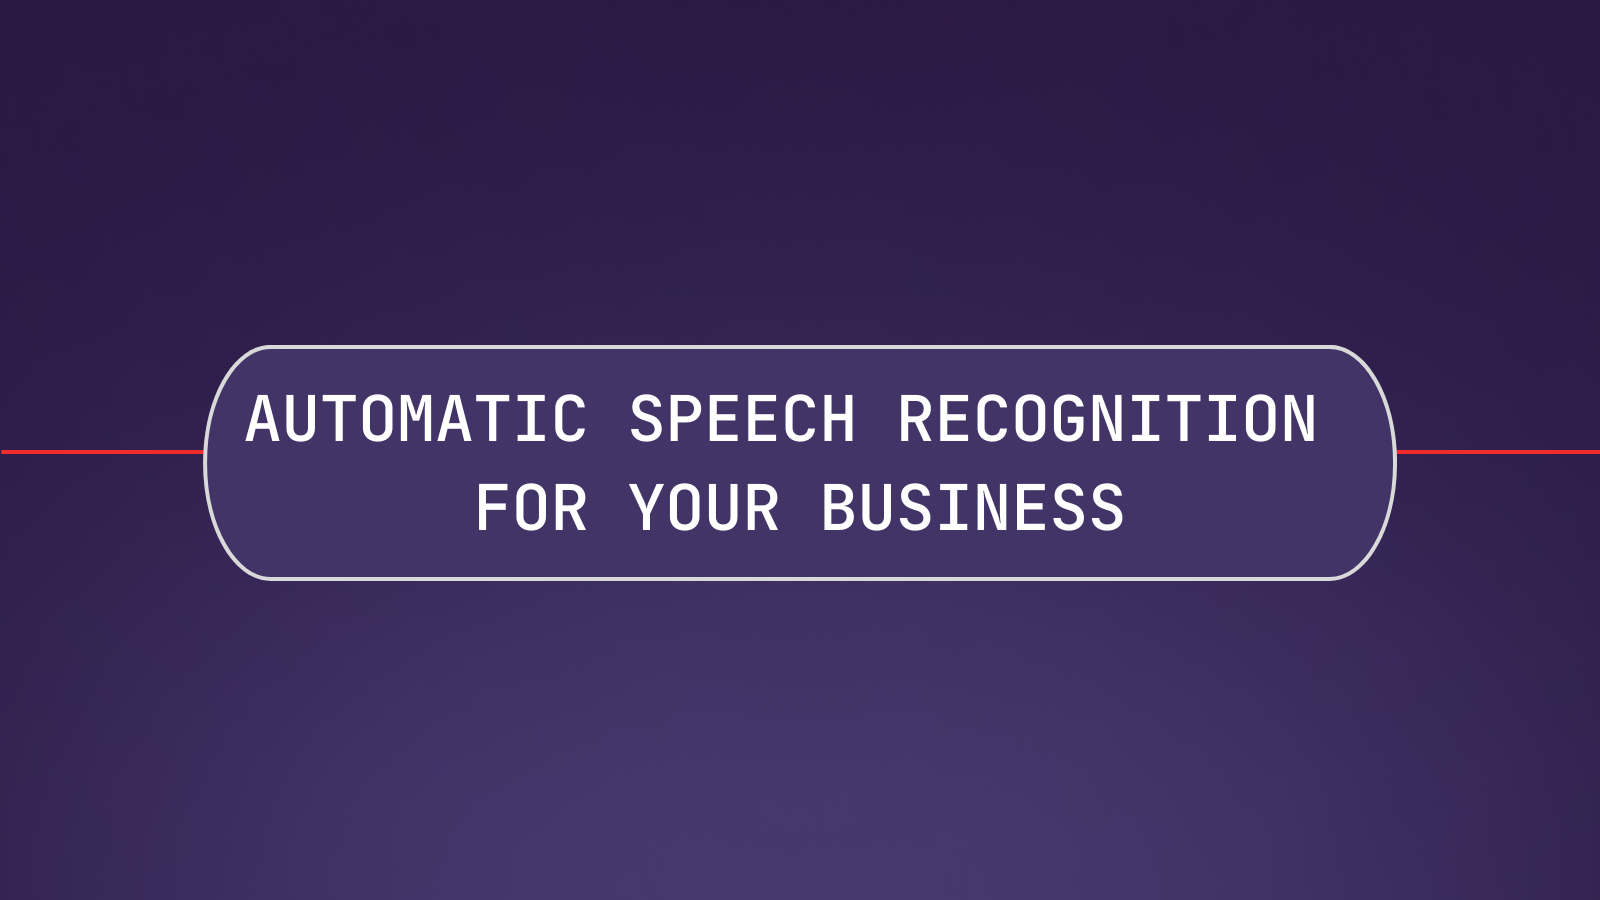 8 Ways Automatic Speech Recognition Can Increase Efficiency For Your Business